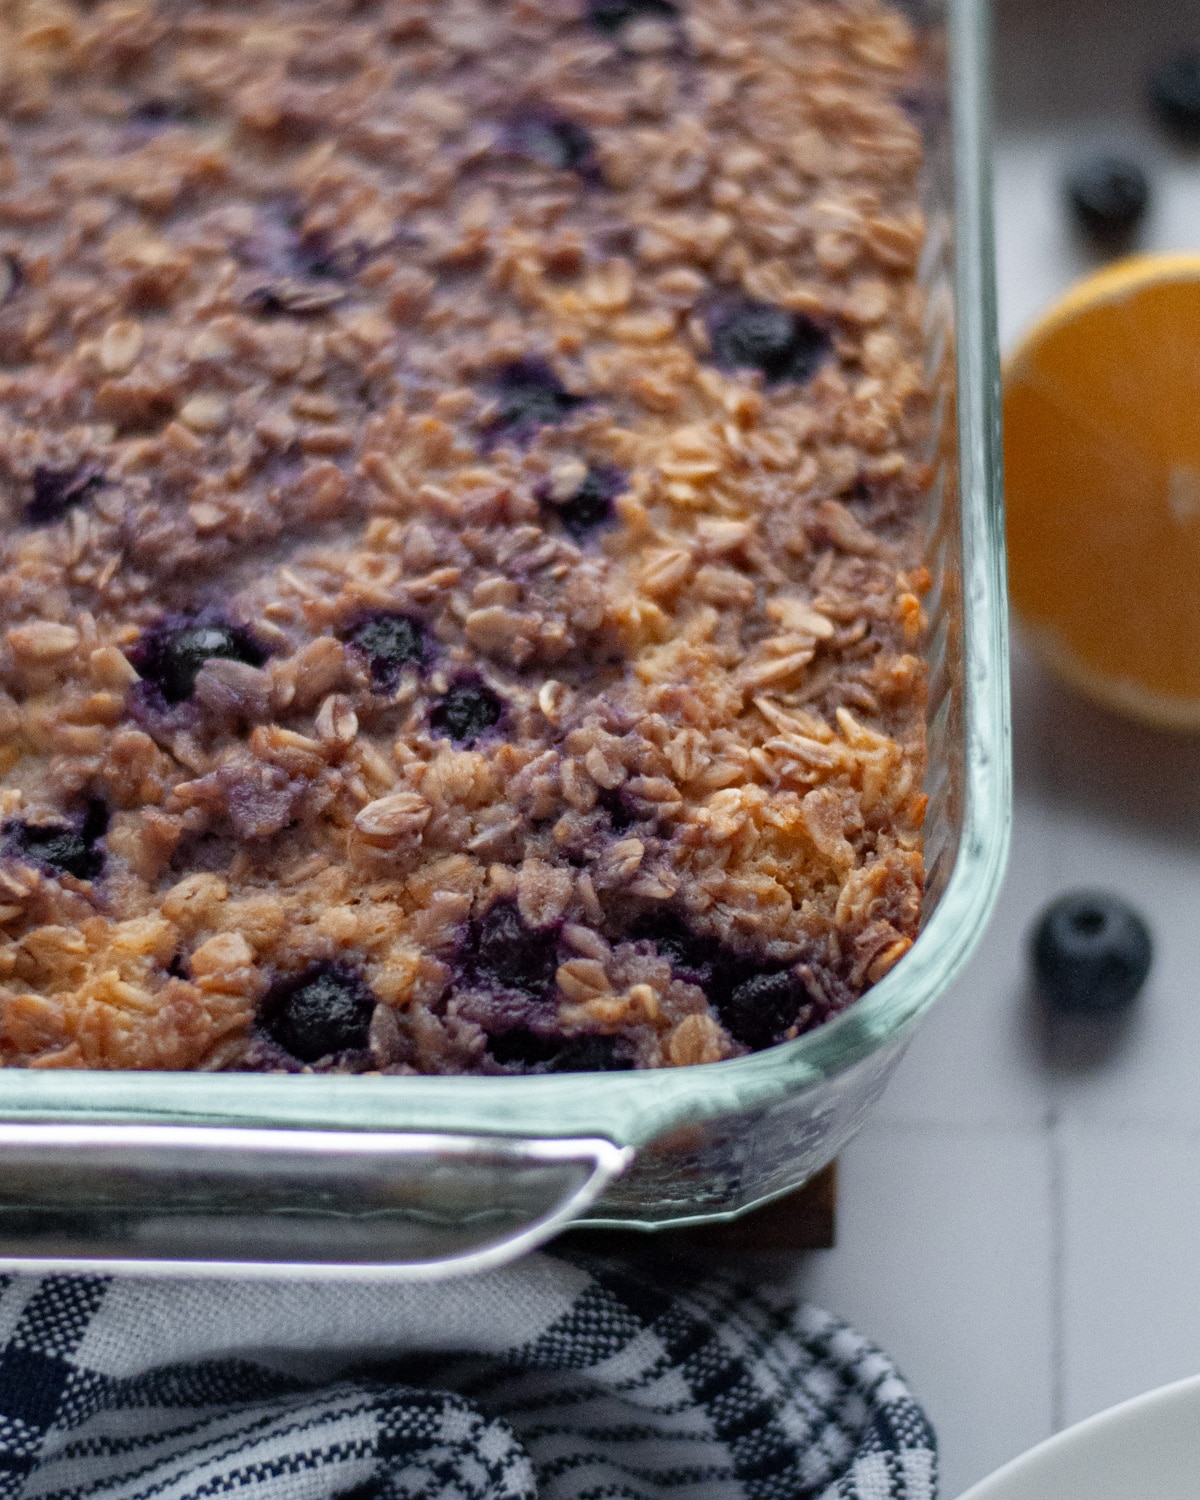 Glass 9x9 baking pan with a golden brown blueberry lemon baked oatmeal fresh out of the oven.